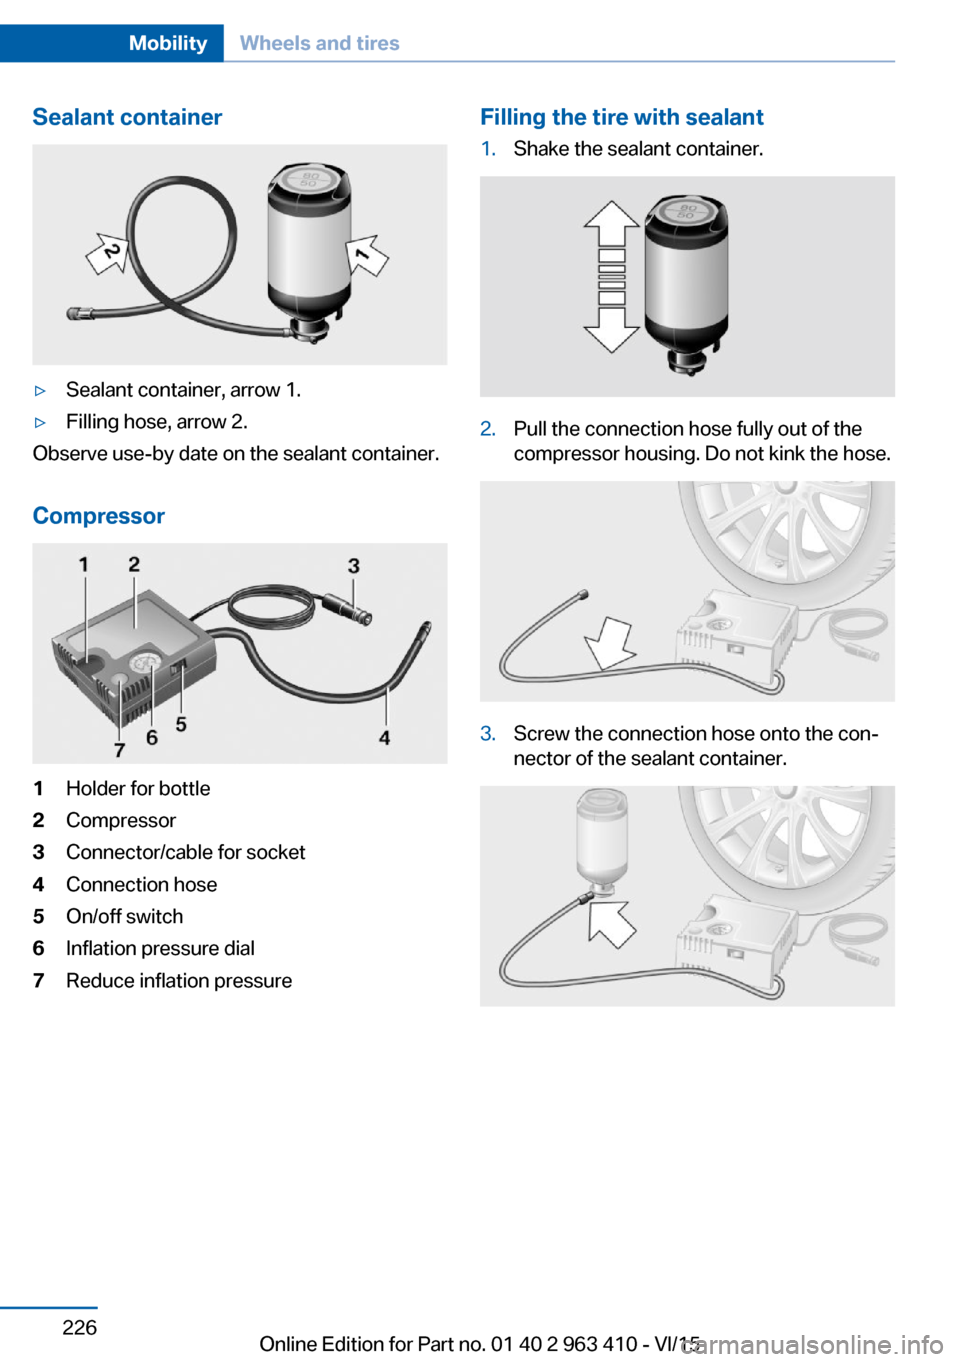 BMW X5 2016 F15 User Guide Sealant container▷Sealant container, arrow 1.▷Filling hose, arrow 2.
Observe use-by date on the sealant container.
Compressor
1Holder for bottle2Compressor3Connector/cable for socket4Connection ho